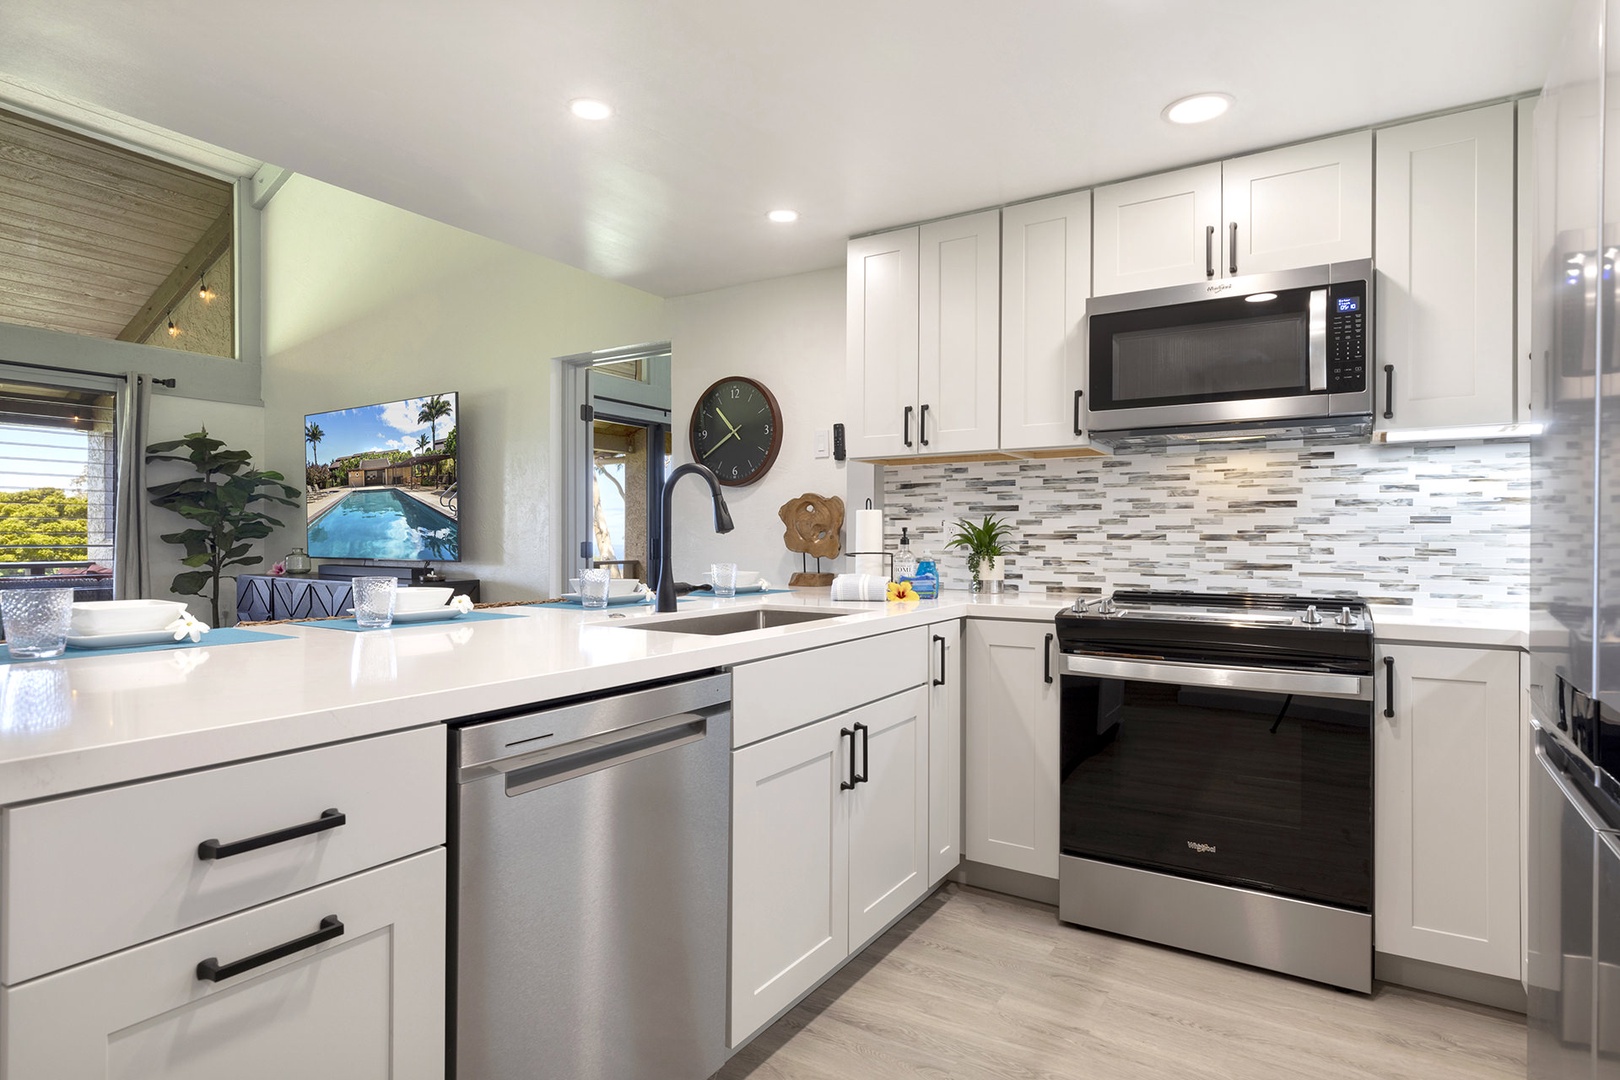 Fully equipped kitchen with stainless-steel appliances